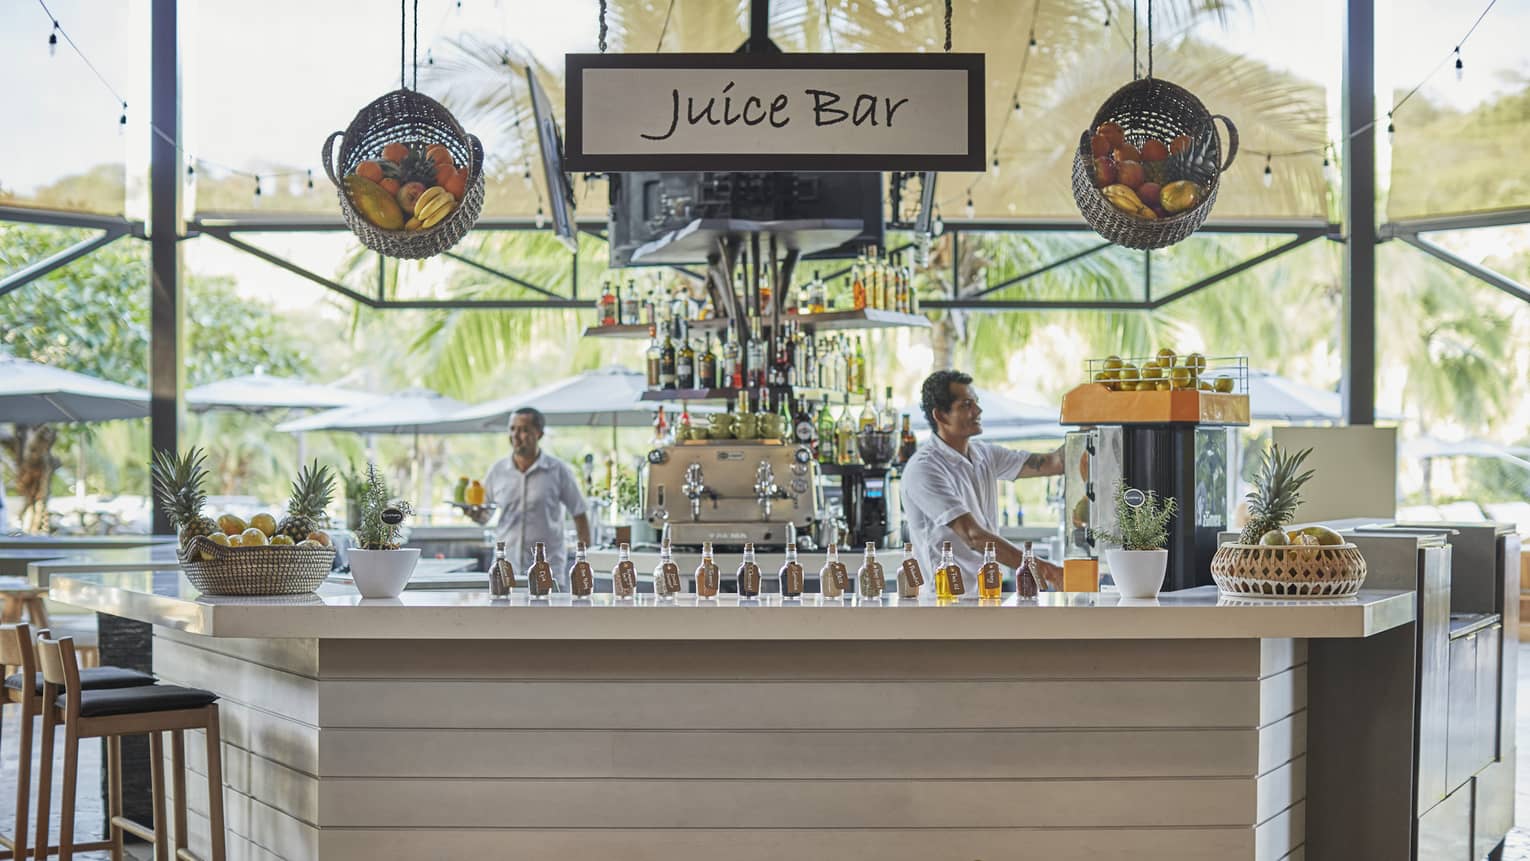 Baskets of fruit adorn the exterior of the wooden paneled juice bar